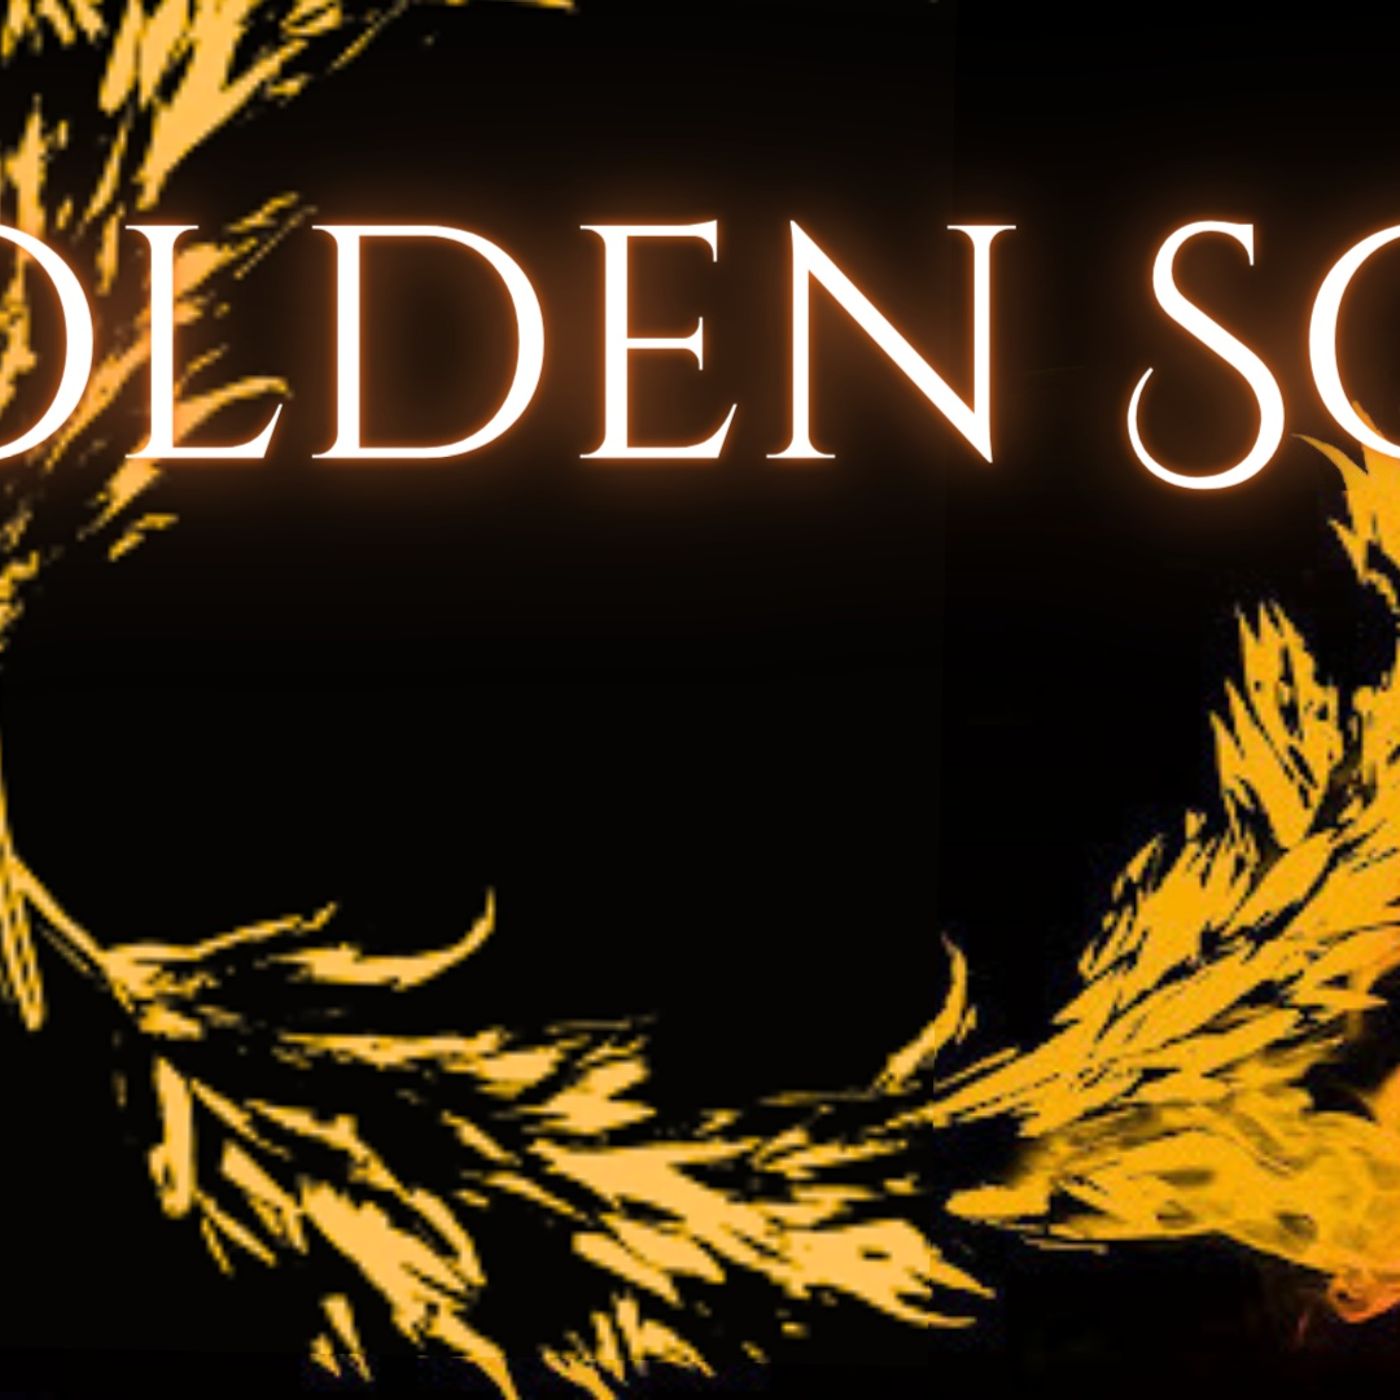 Golden Son, Chapters 9-11